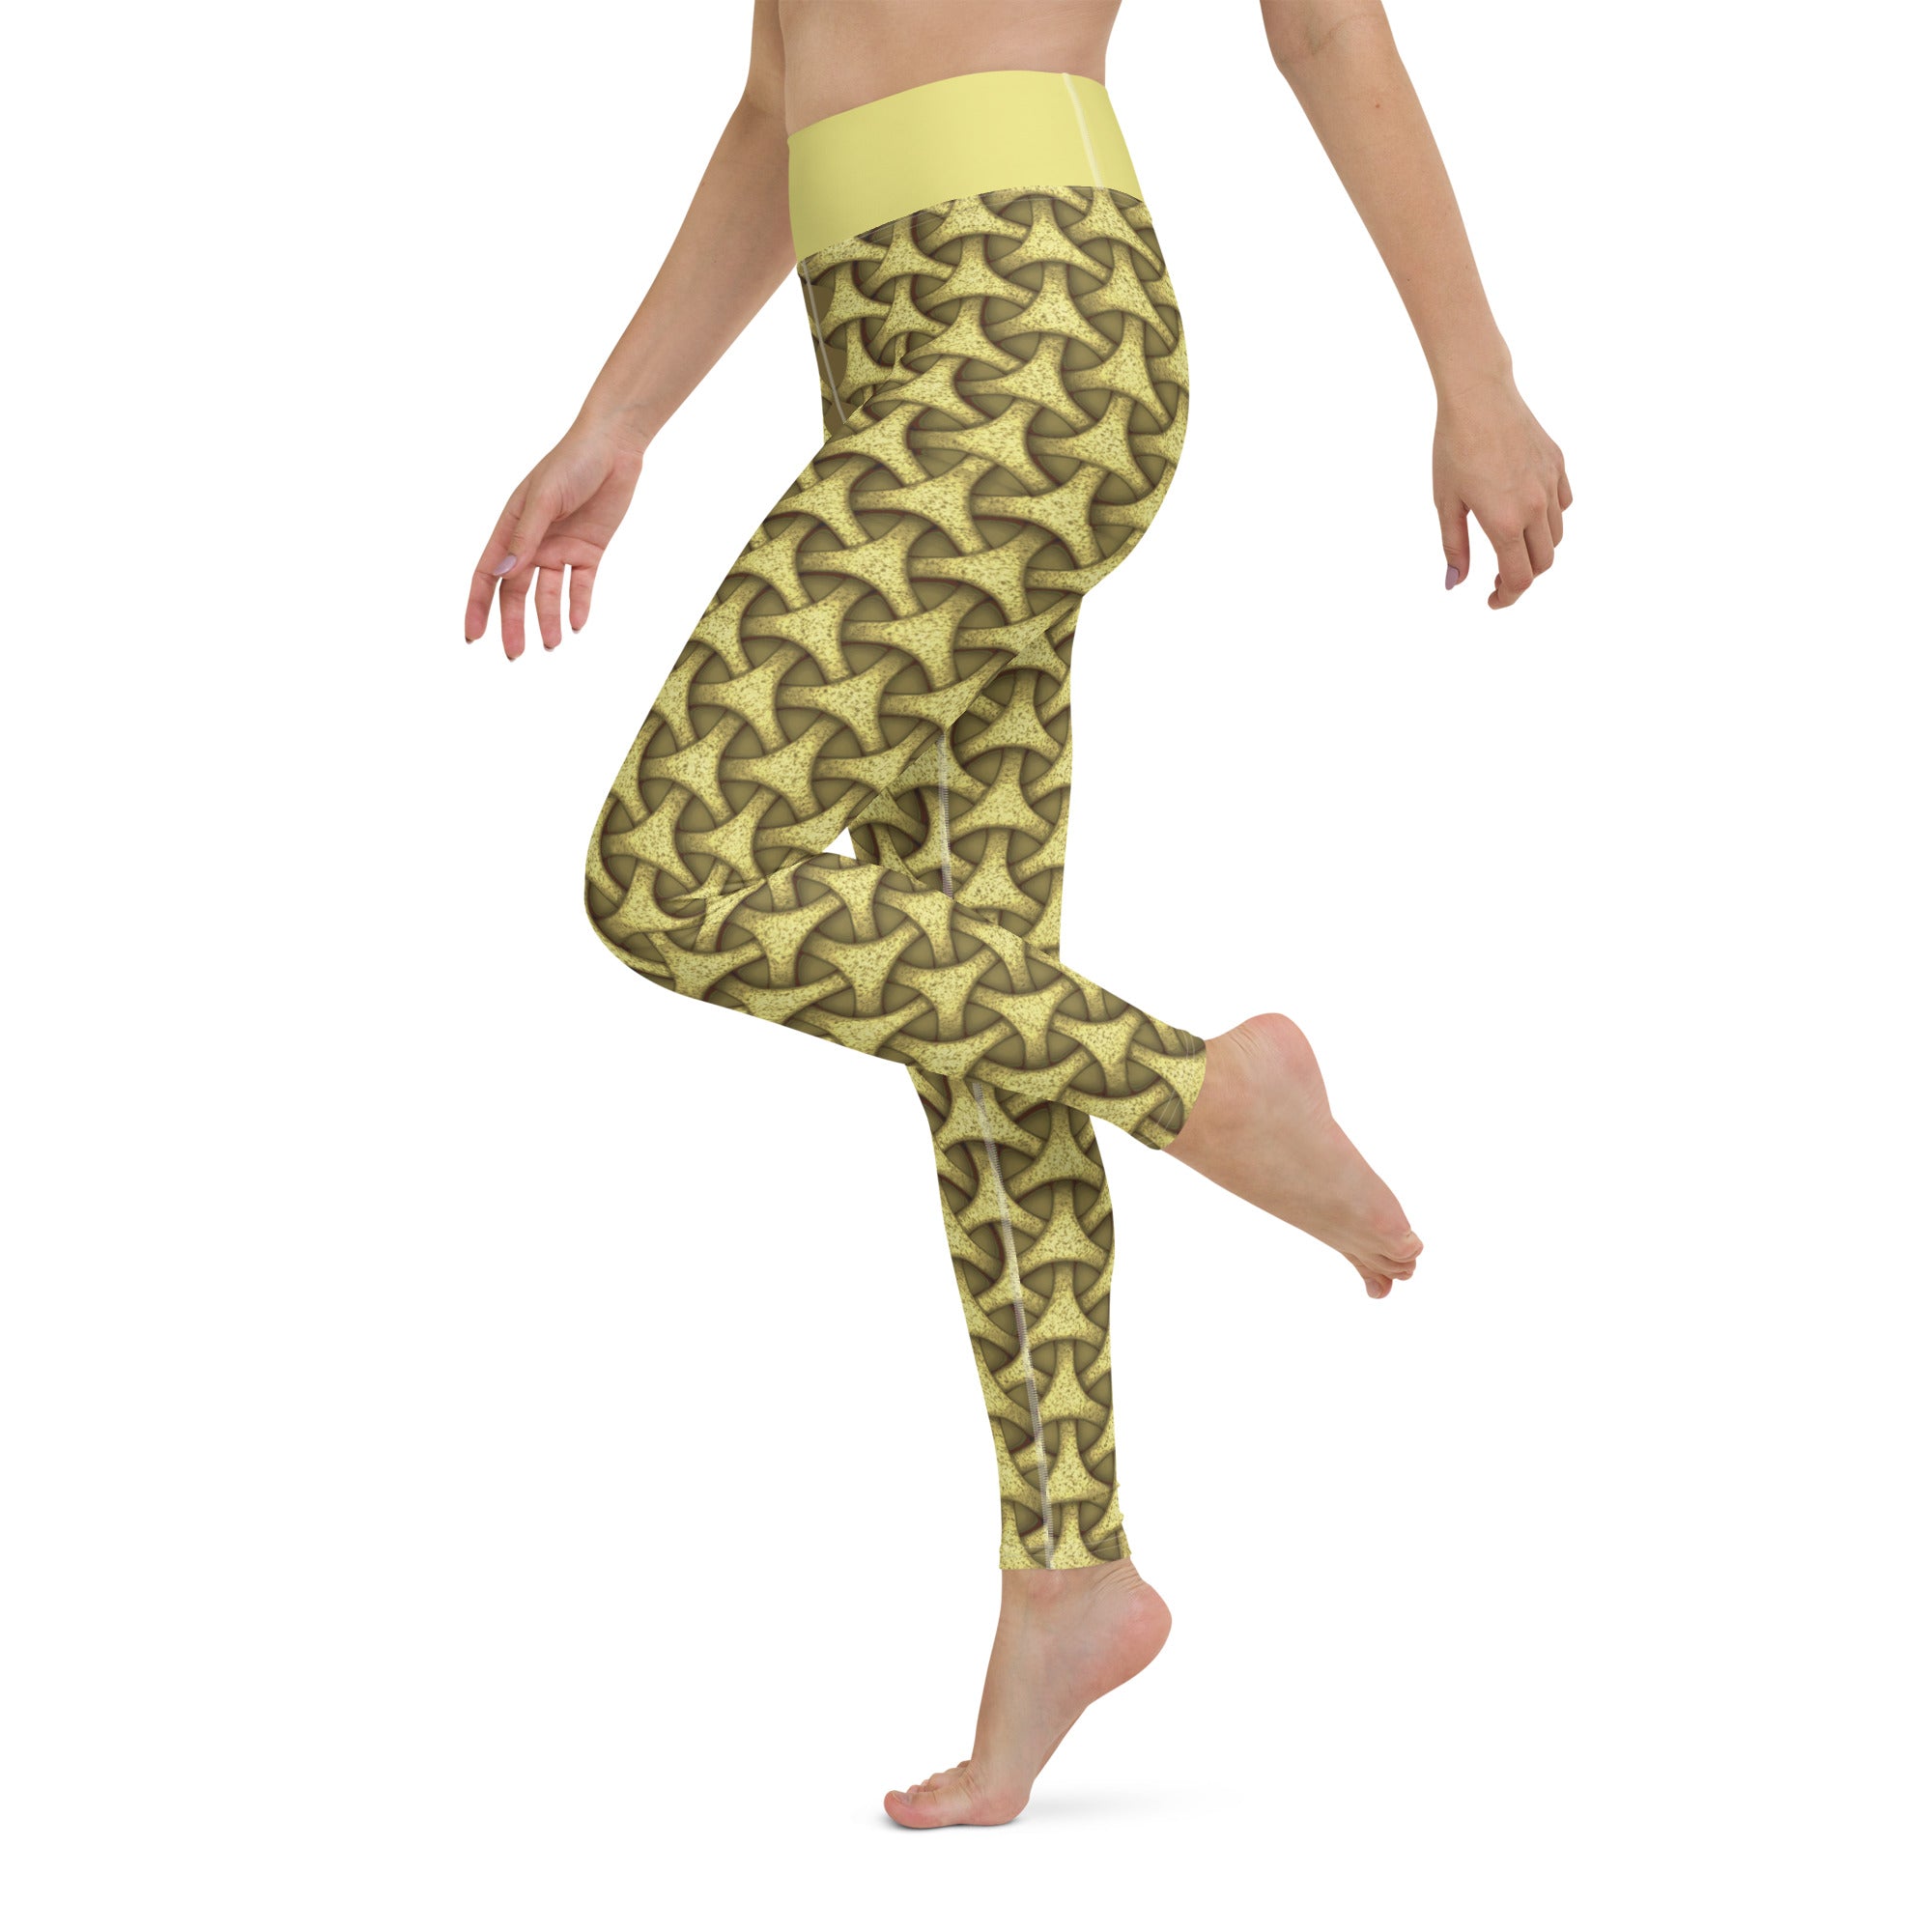 Celestial Glow Leggings complementing an early morning meditation session.